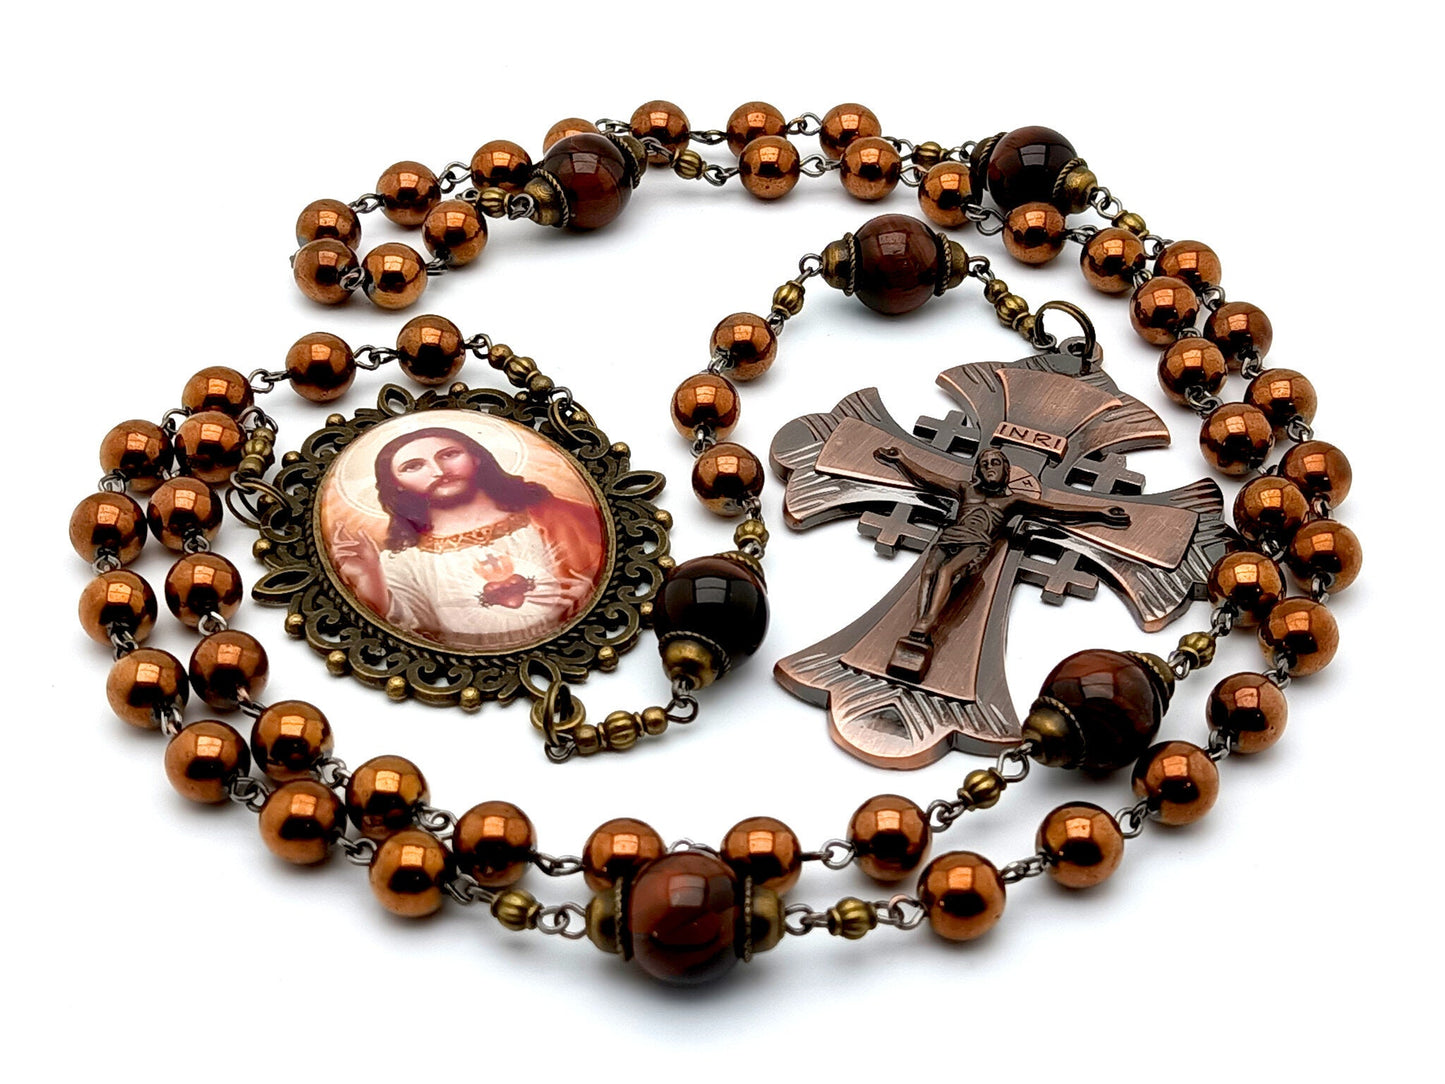 Sacred Heart unique rosary beads with bronze hematite and tigers eye gemstone beads, bronze crucifix and picture centre medal.